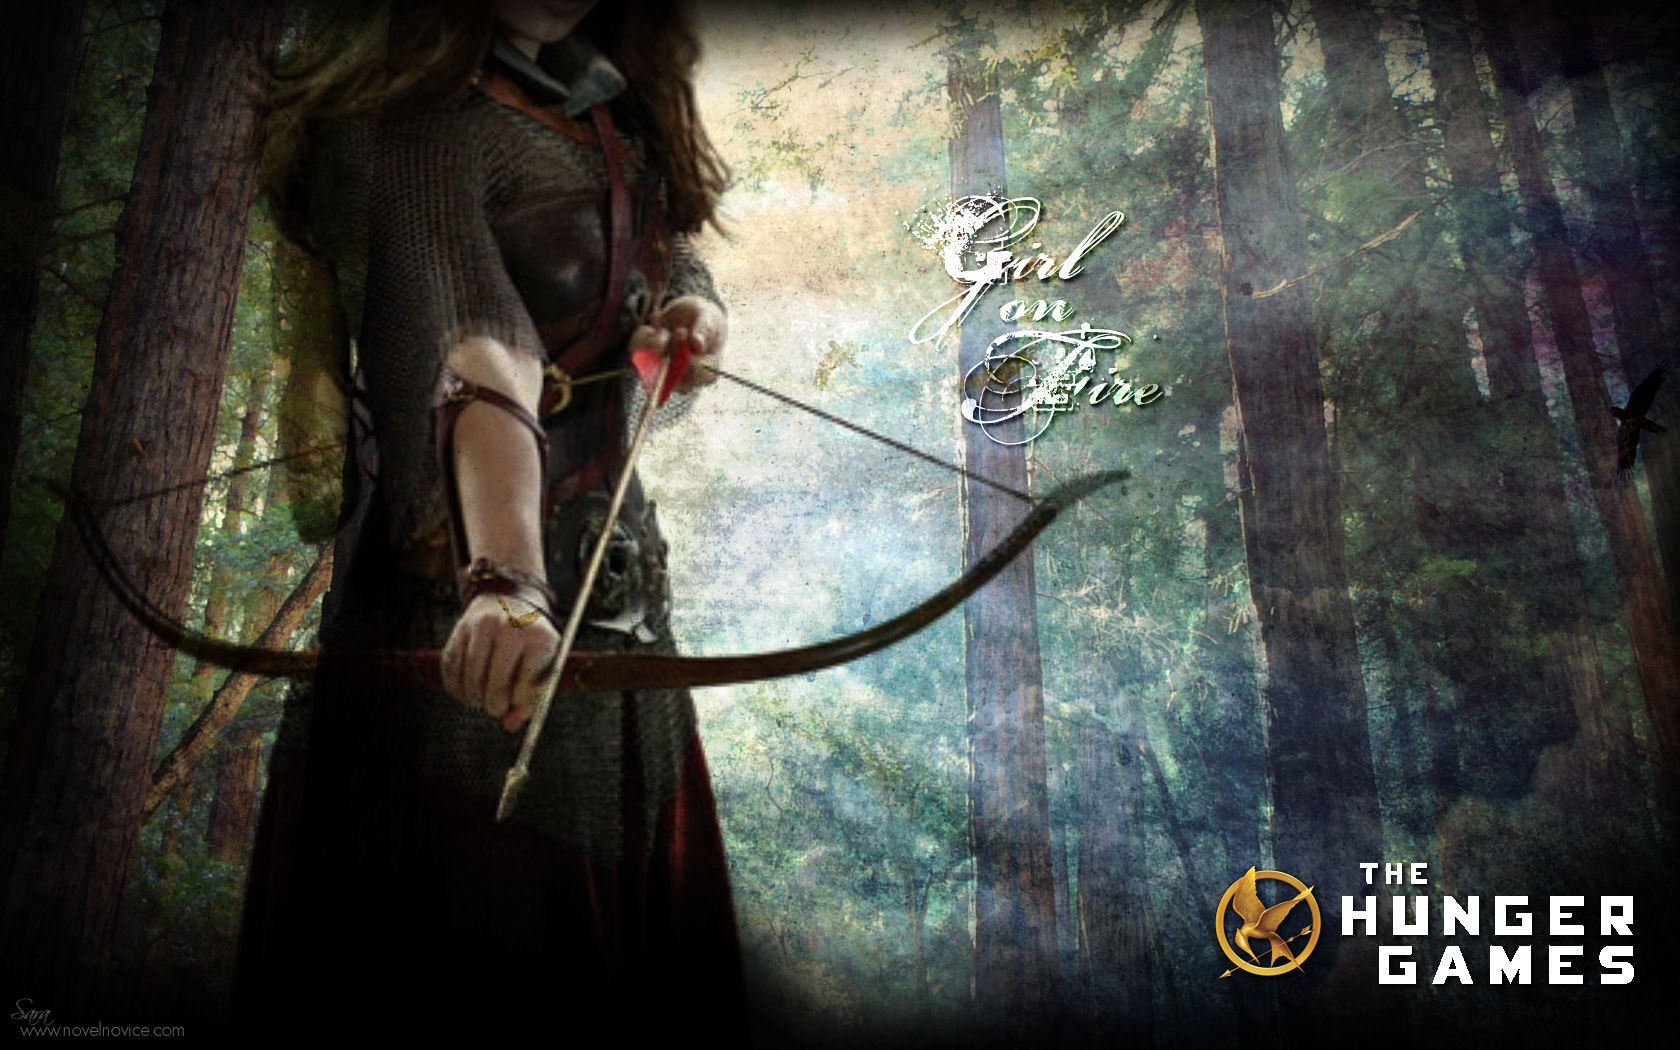 The Hunger Games images quotThe Hunger Gamesquot Wallpapers HD 1680x1050